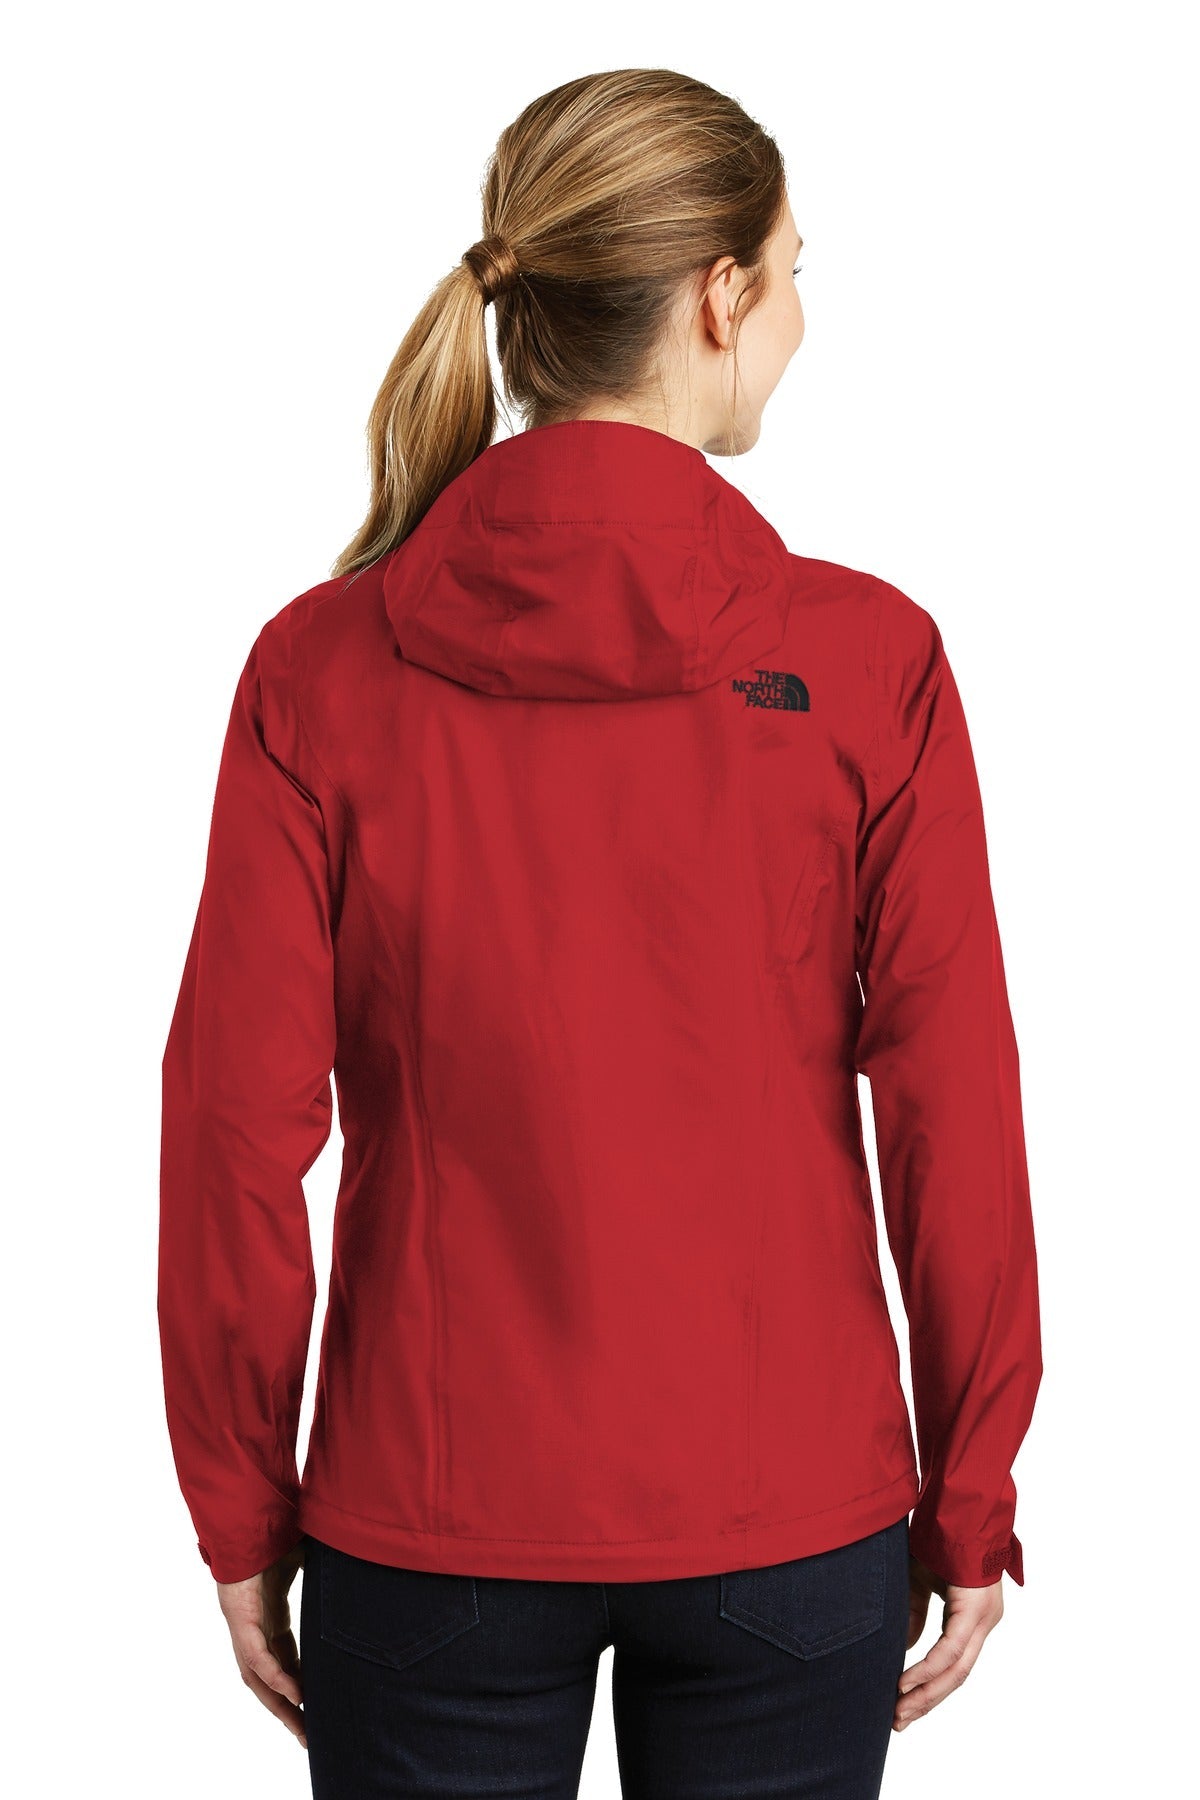 The North Face ® Ladies DryVent™ Rain Jacket. NF0A3LH5 - DFW Impression